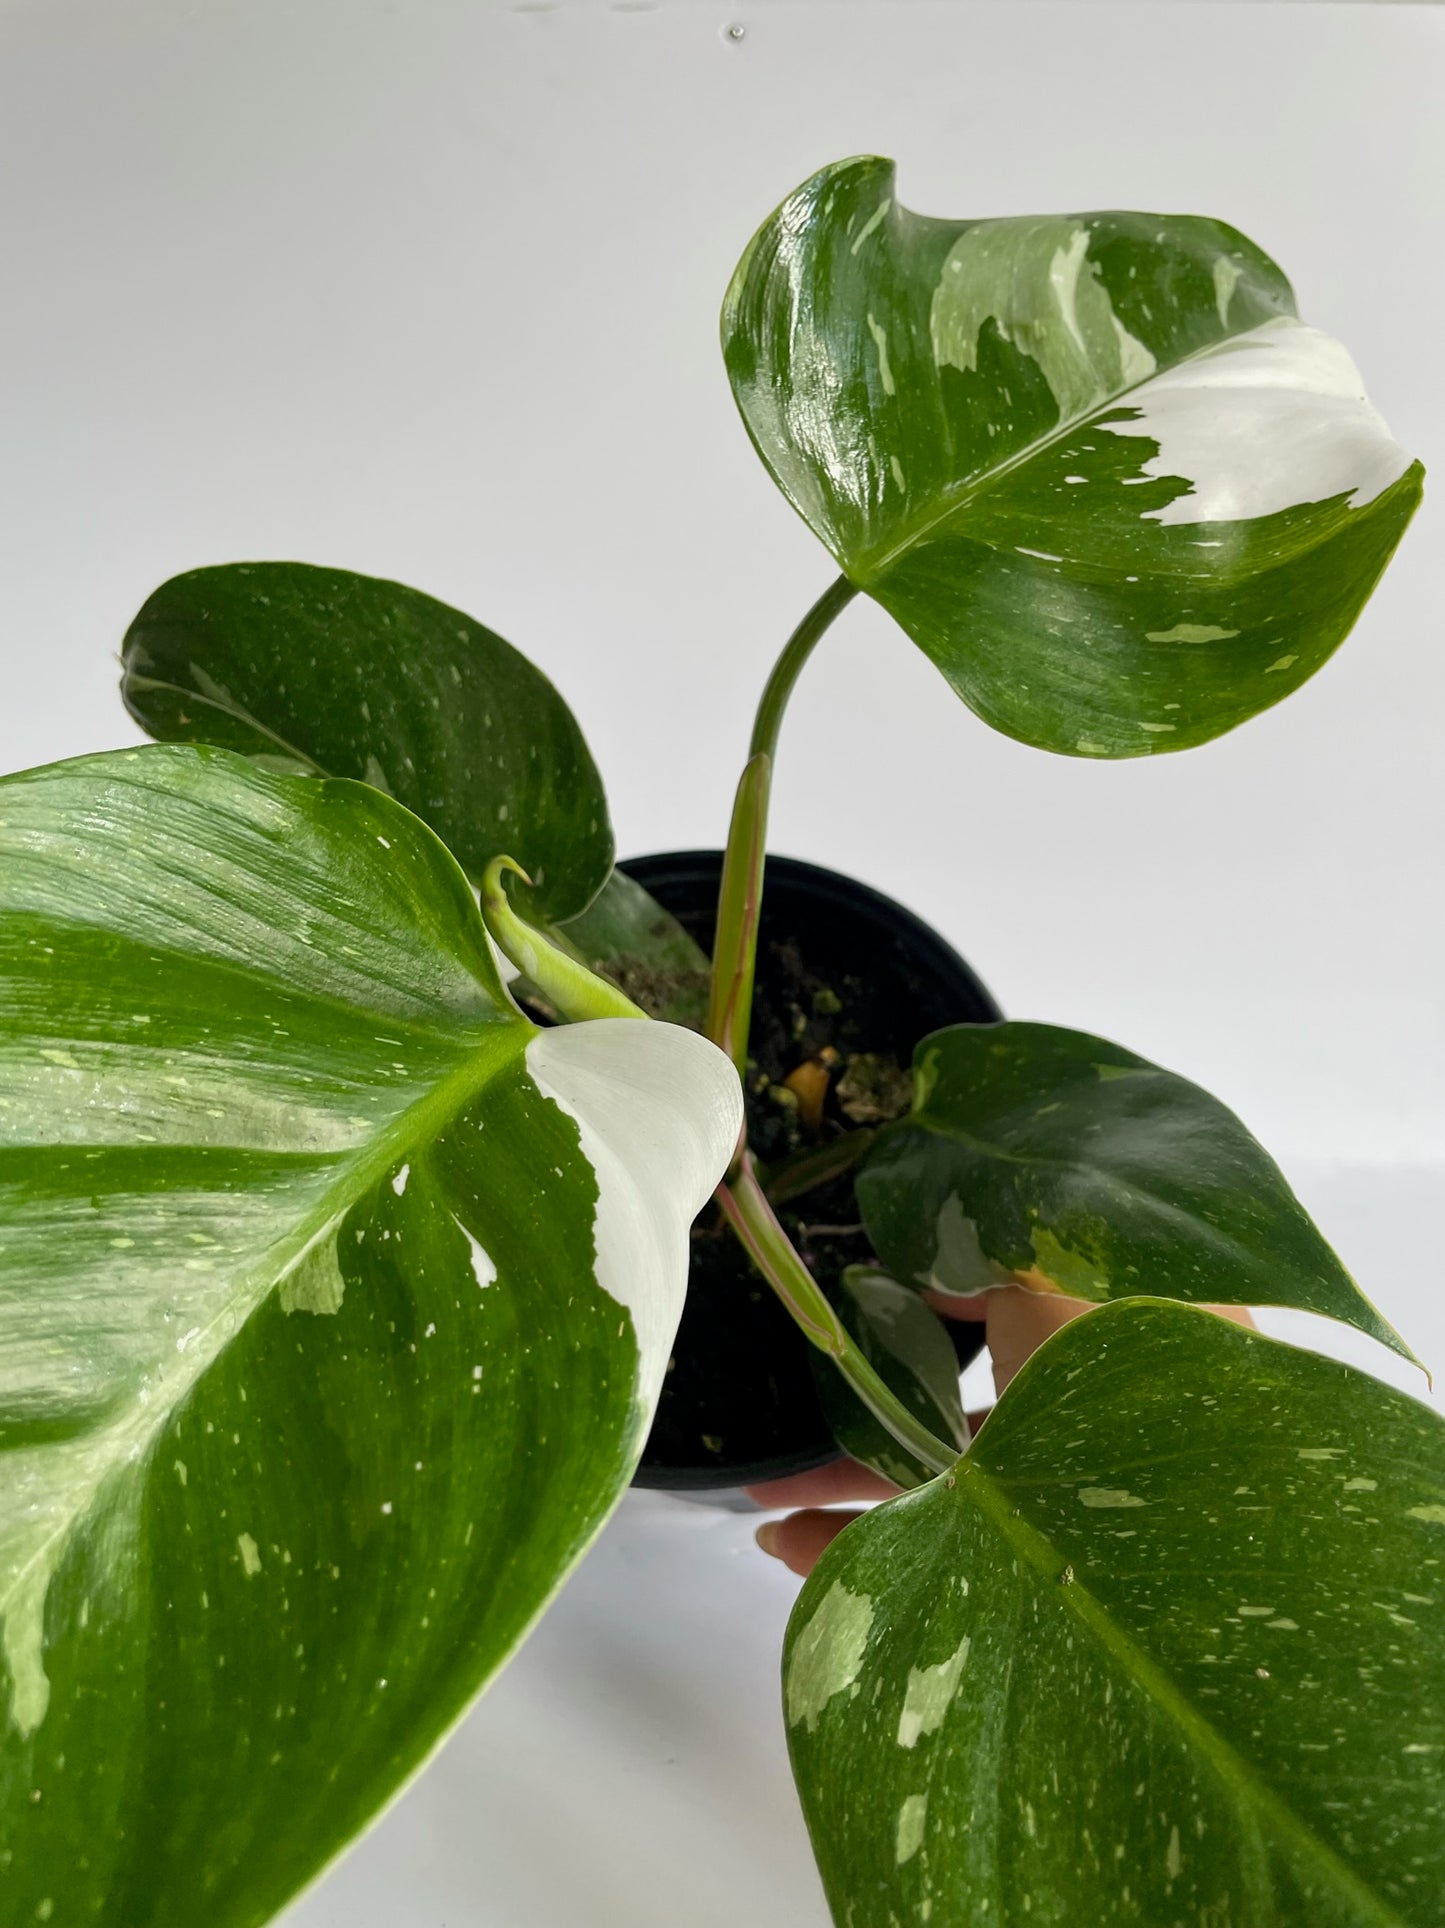 Philodendron Erubescens 'White Princess'- Stunning, White Variegated Leaves, Climbing Philodendron Plant- (4" or 6" Pot)